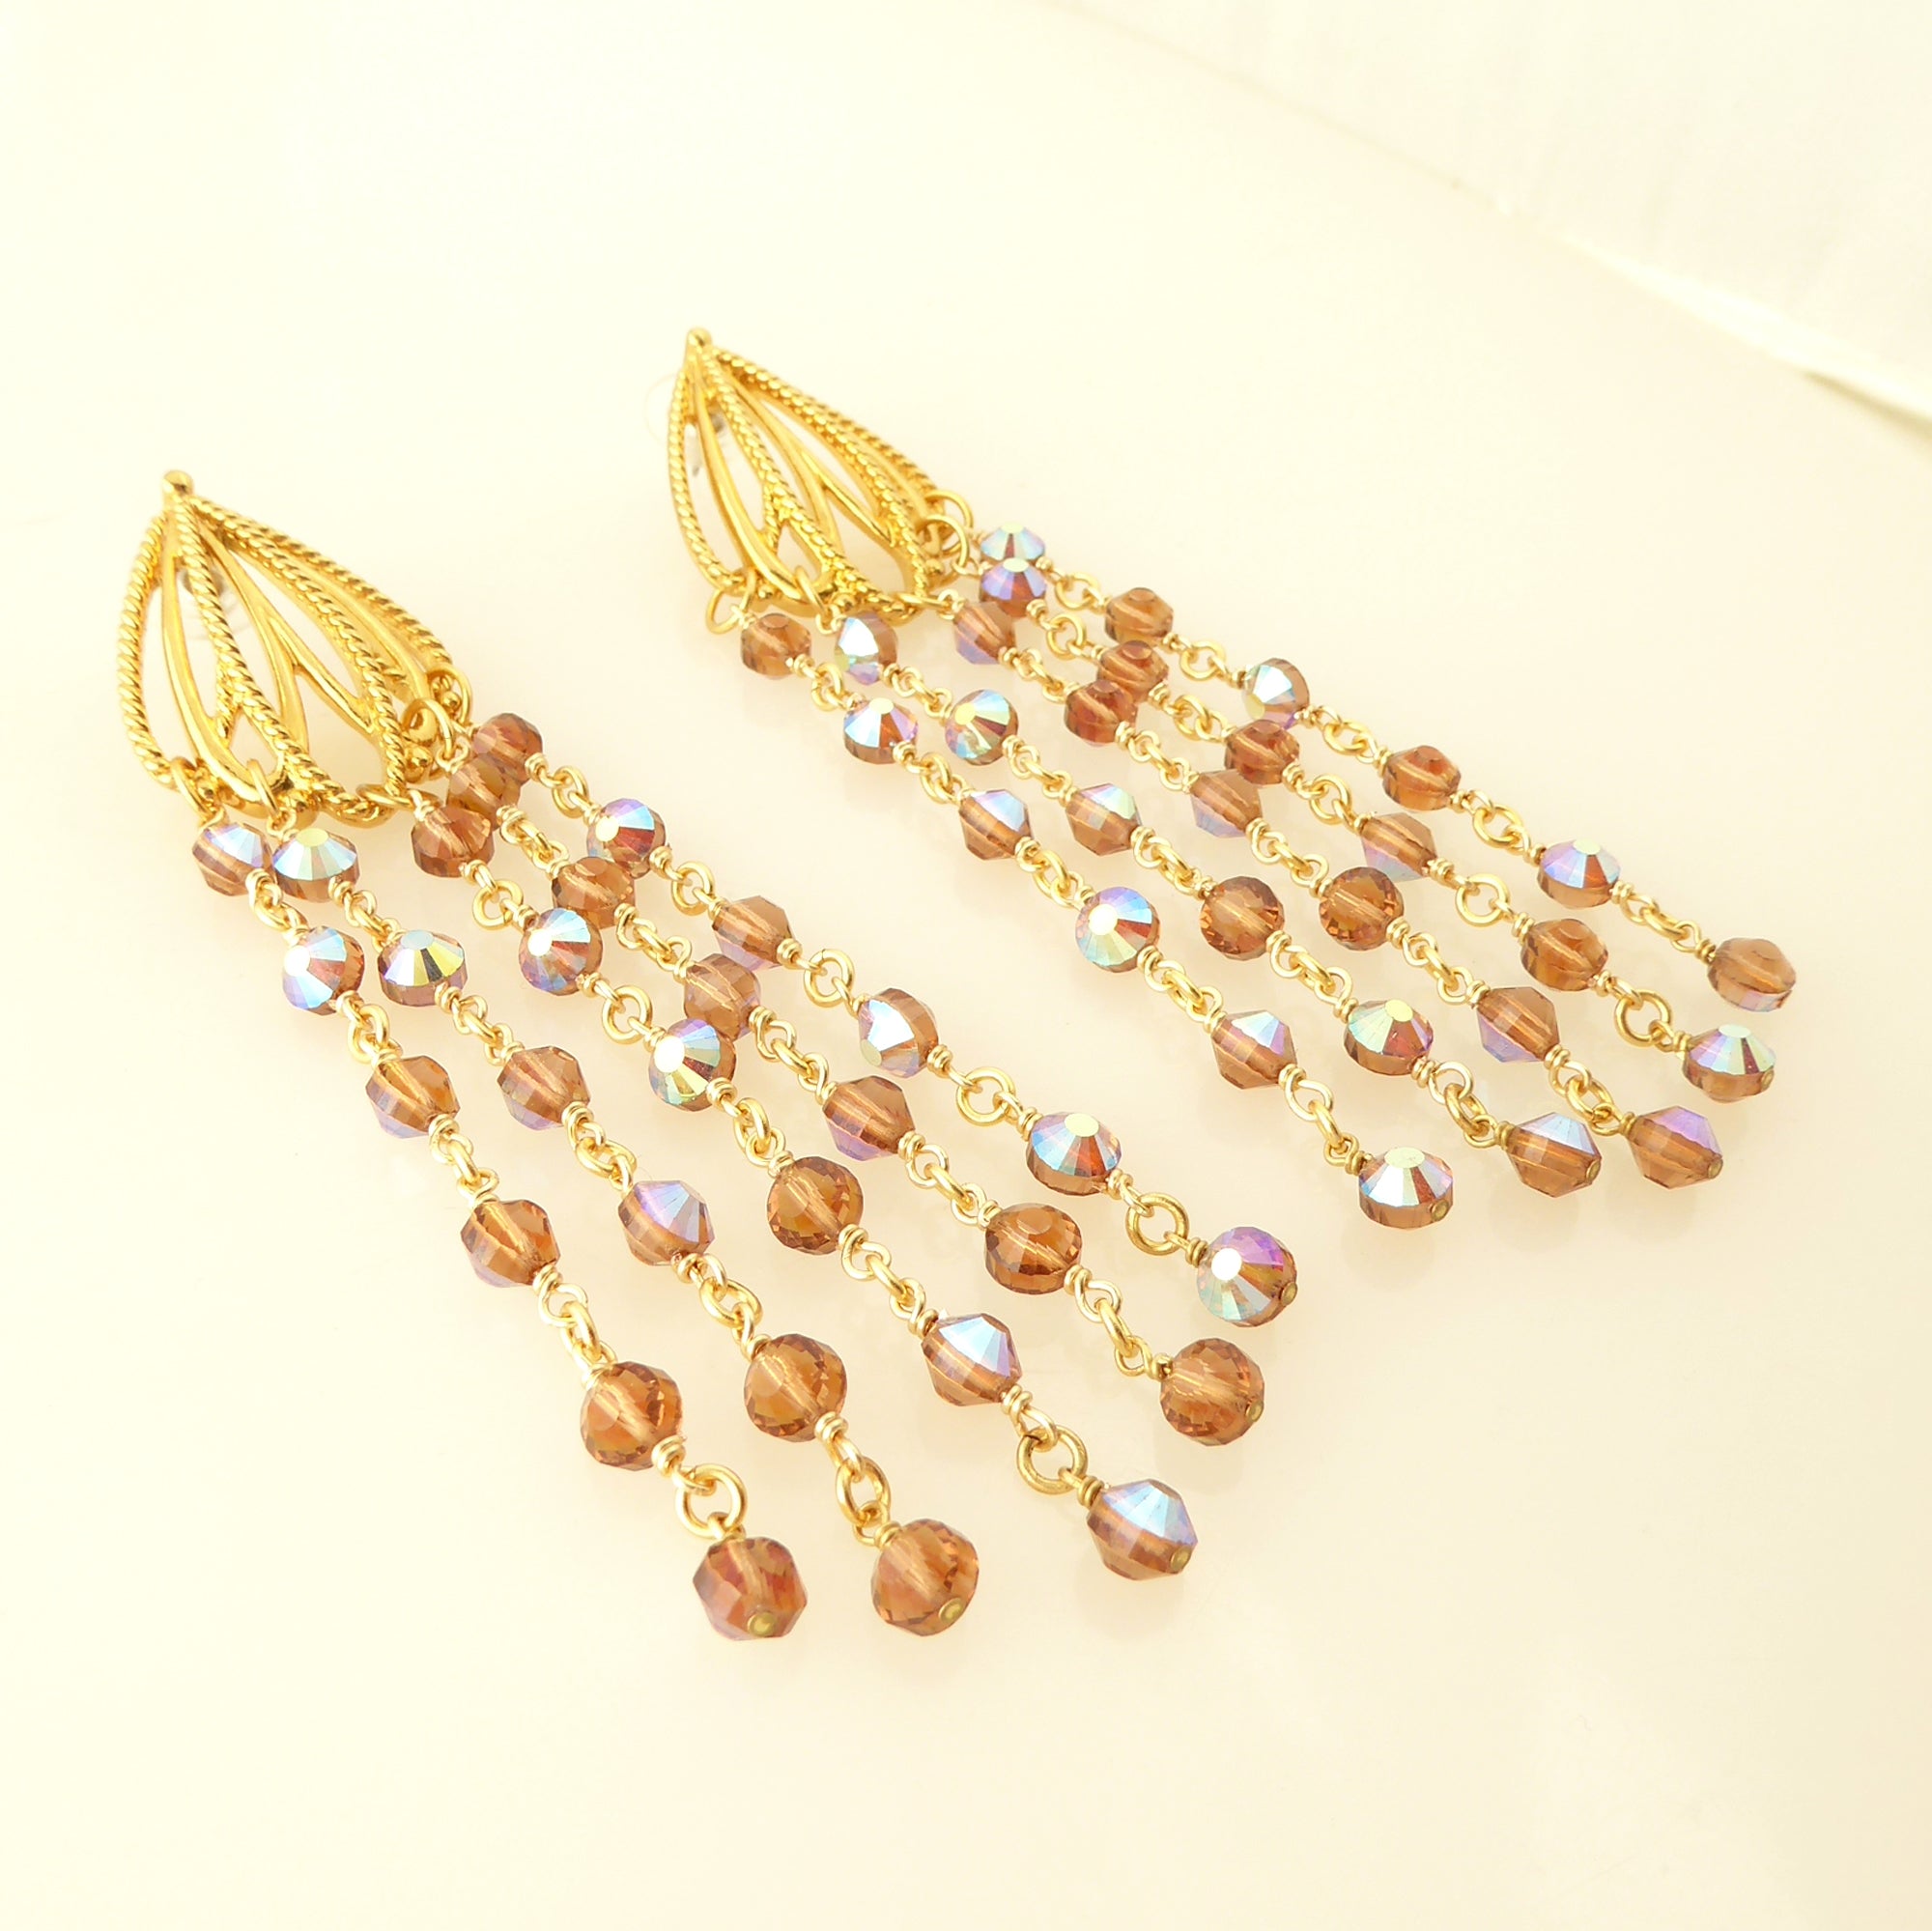 Iridescent topaz chandelier earrings by Jenny Dayco 2